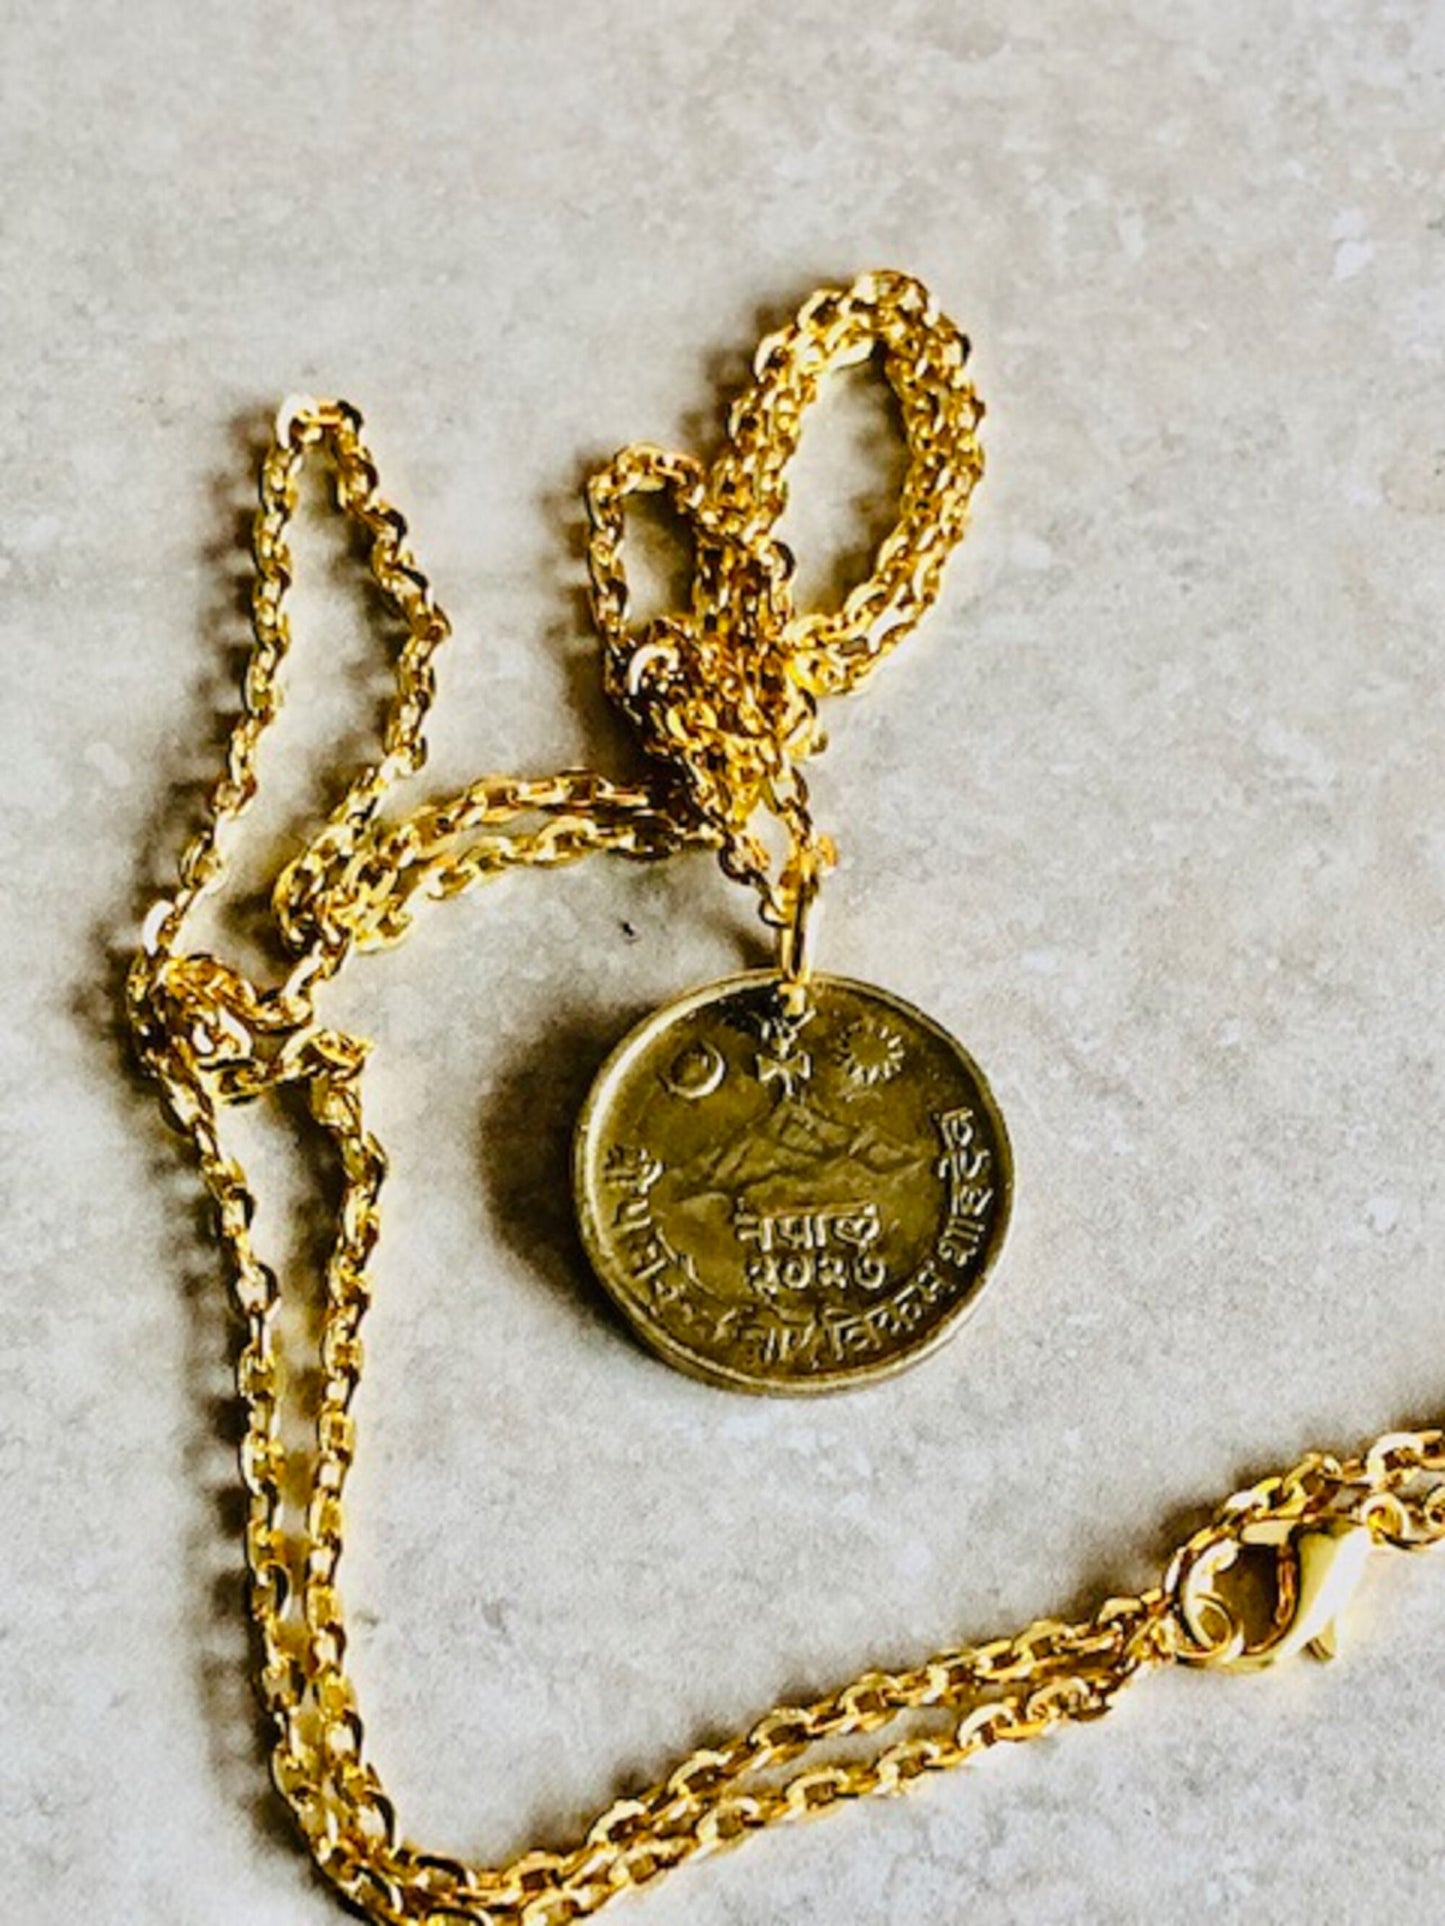 Nepal Coin Necklace Nepal Coin Cow Vintage Pendant Necklace Custom Made Rare Coins Coin Enthusiast Fashion Handmade Jewelry